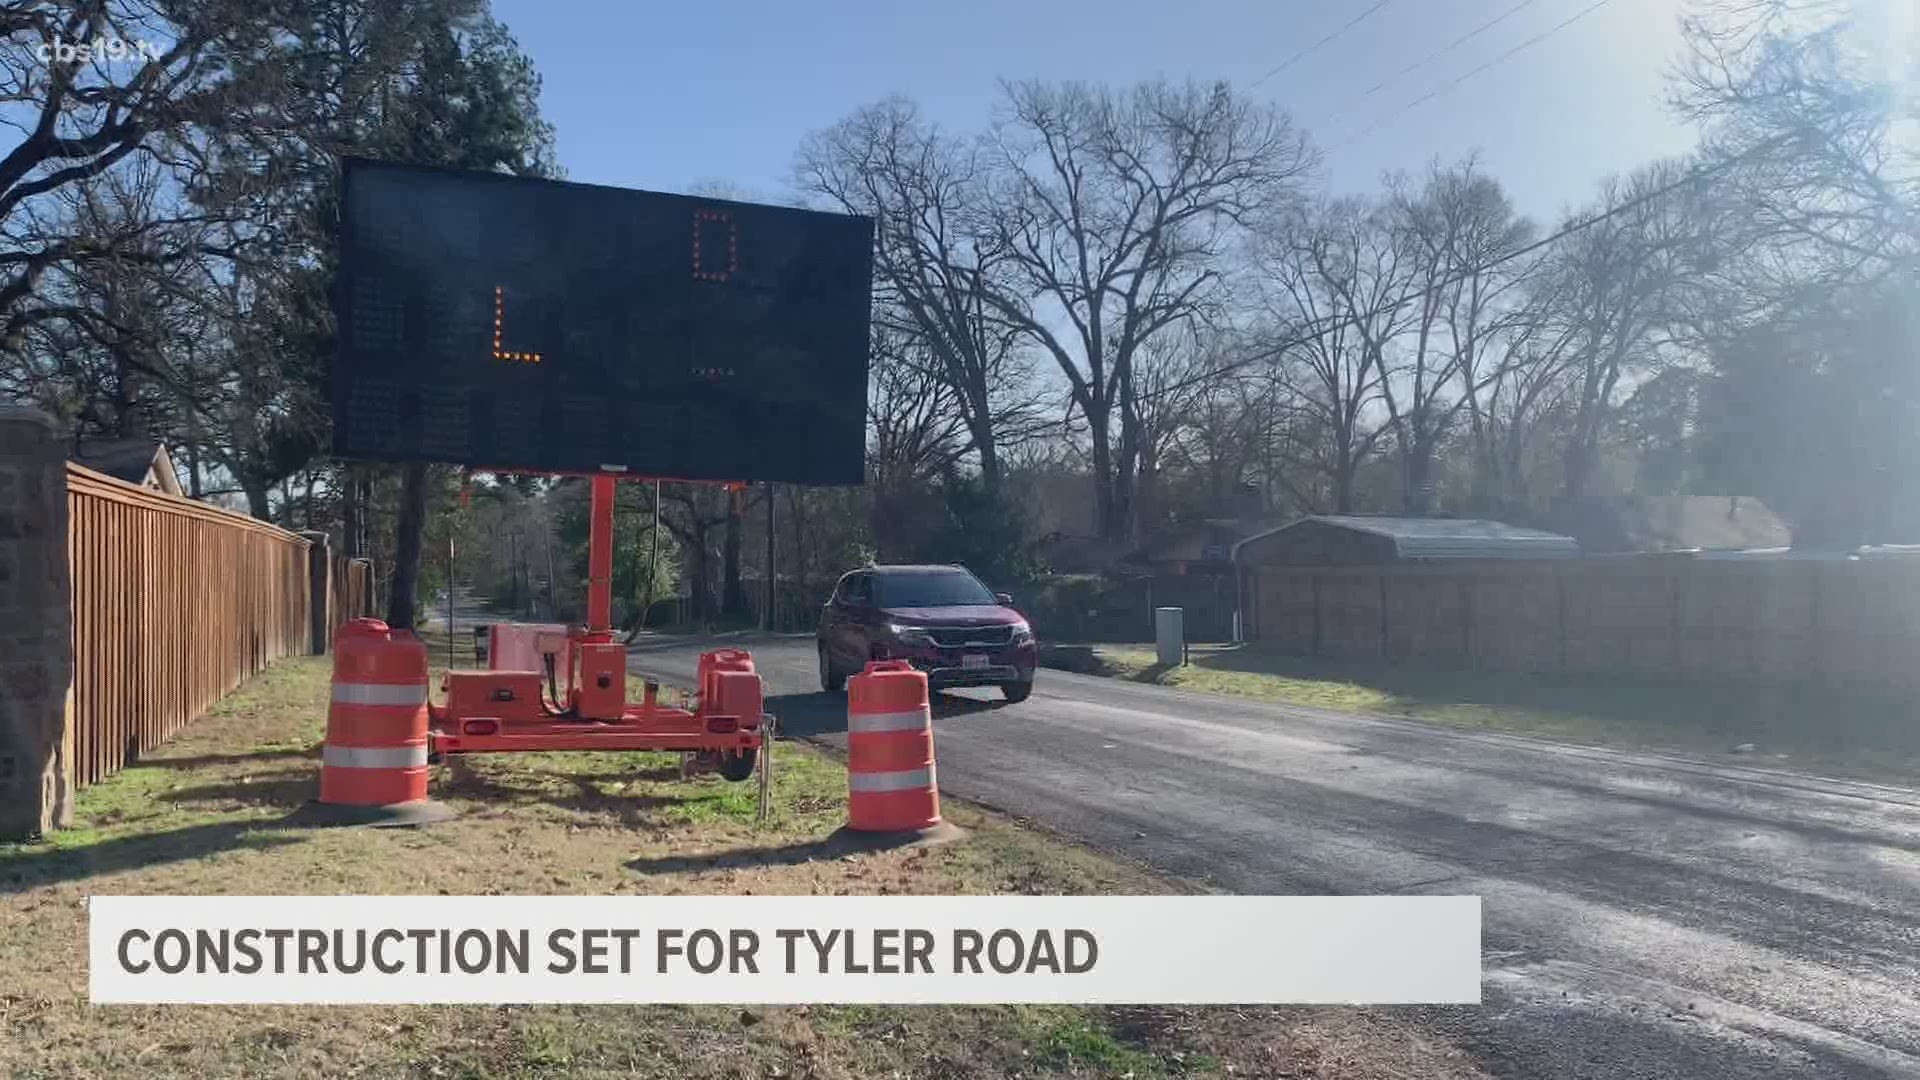 Construction for Cambridge Road is scheduled to begin on January 19 and be completed by May 2022.